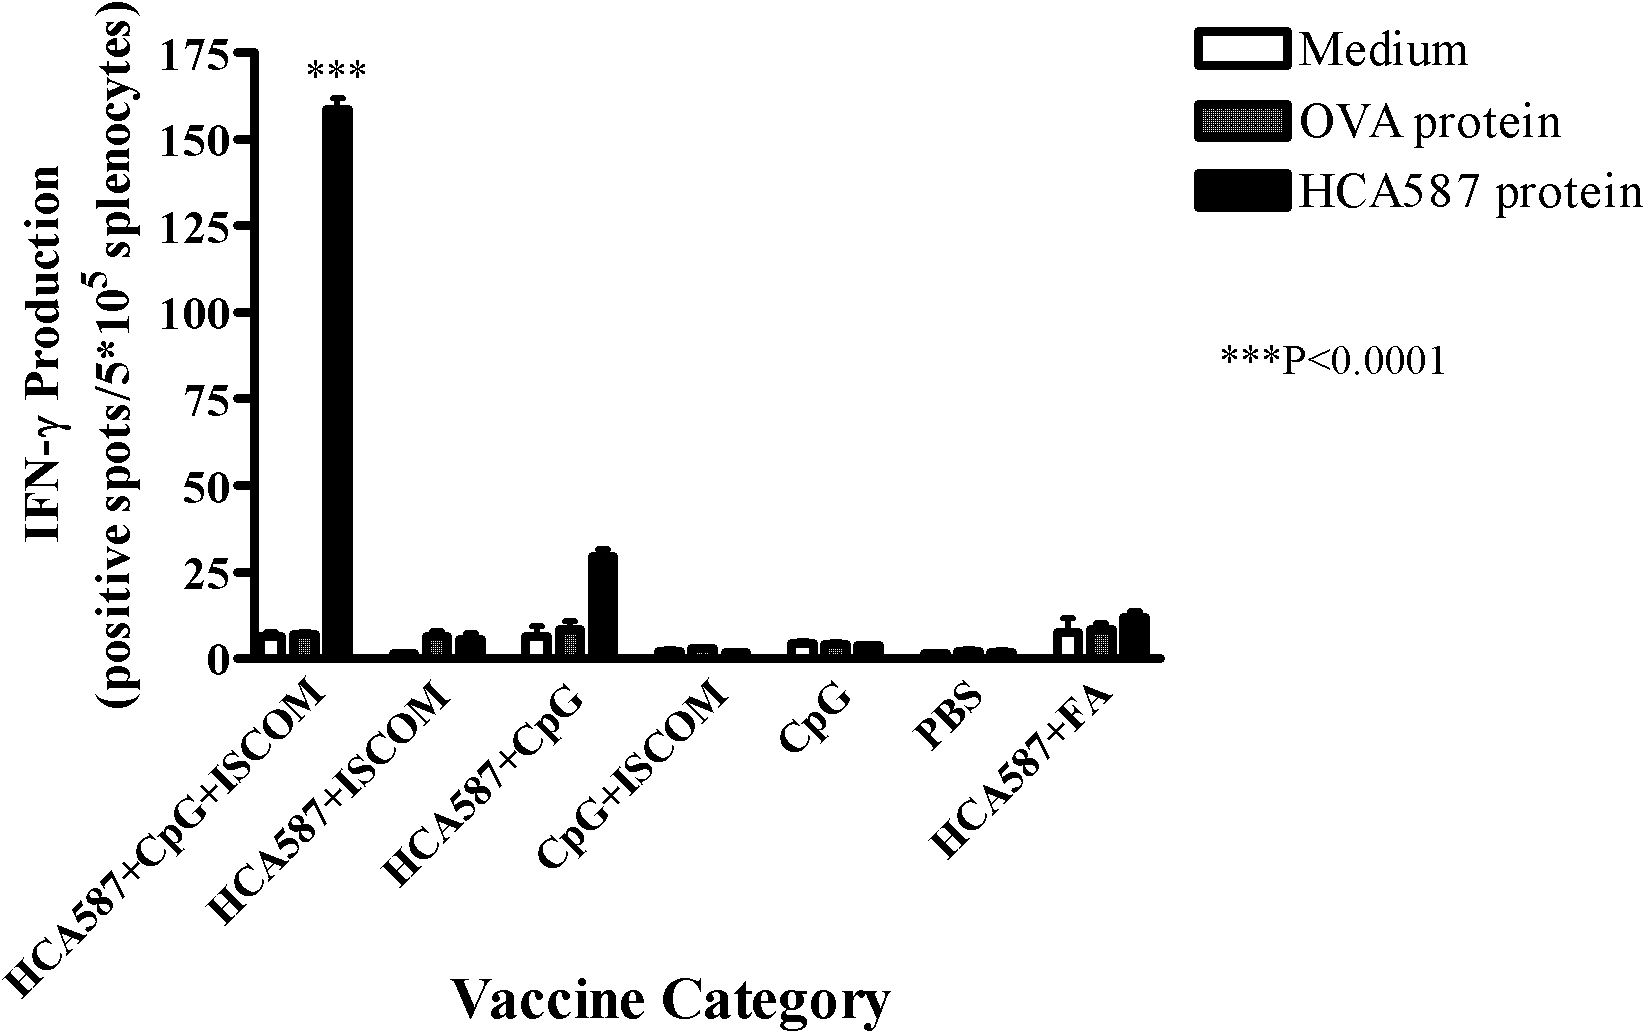 Cancertestis antigen HCA587 protein vaccine and application thereof